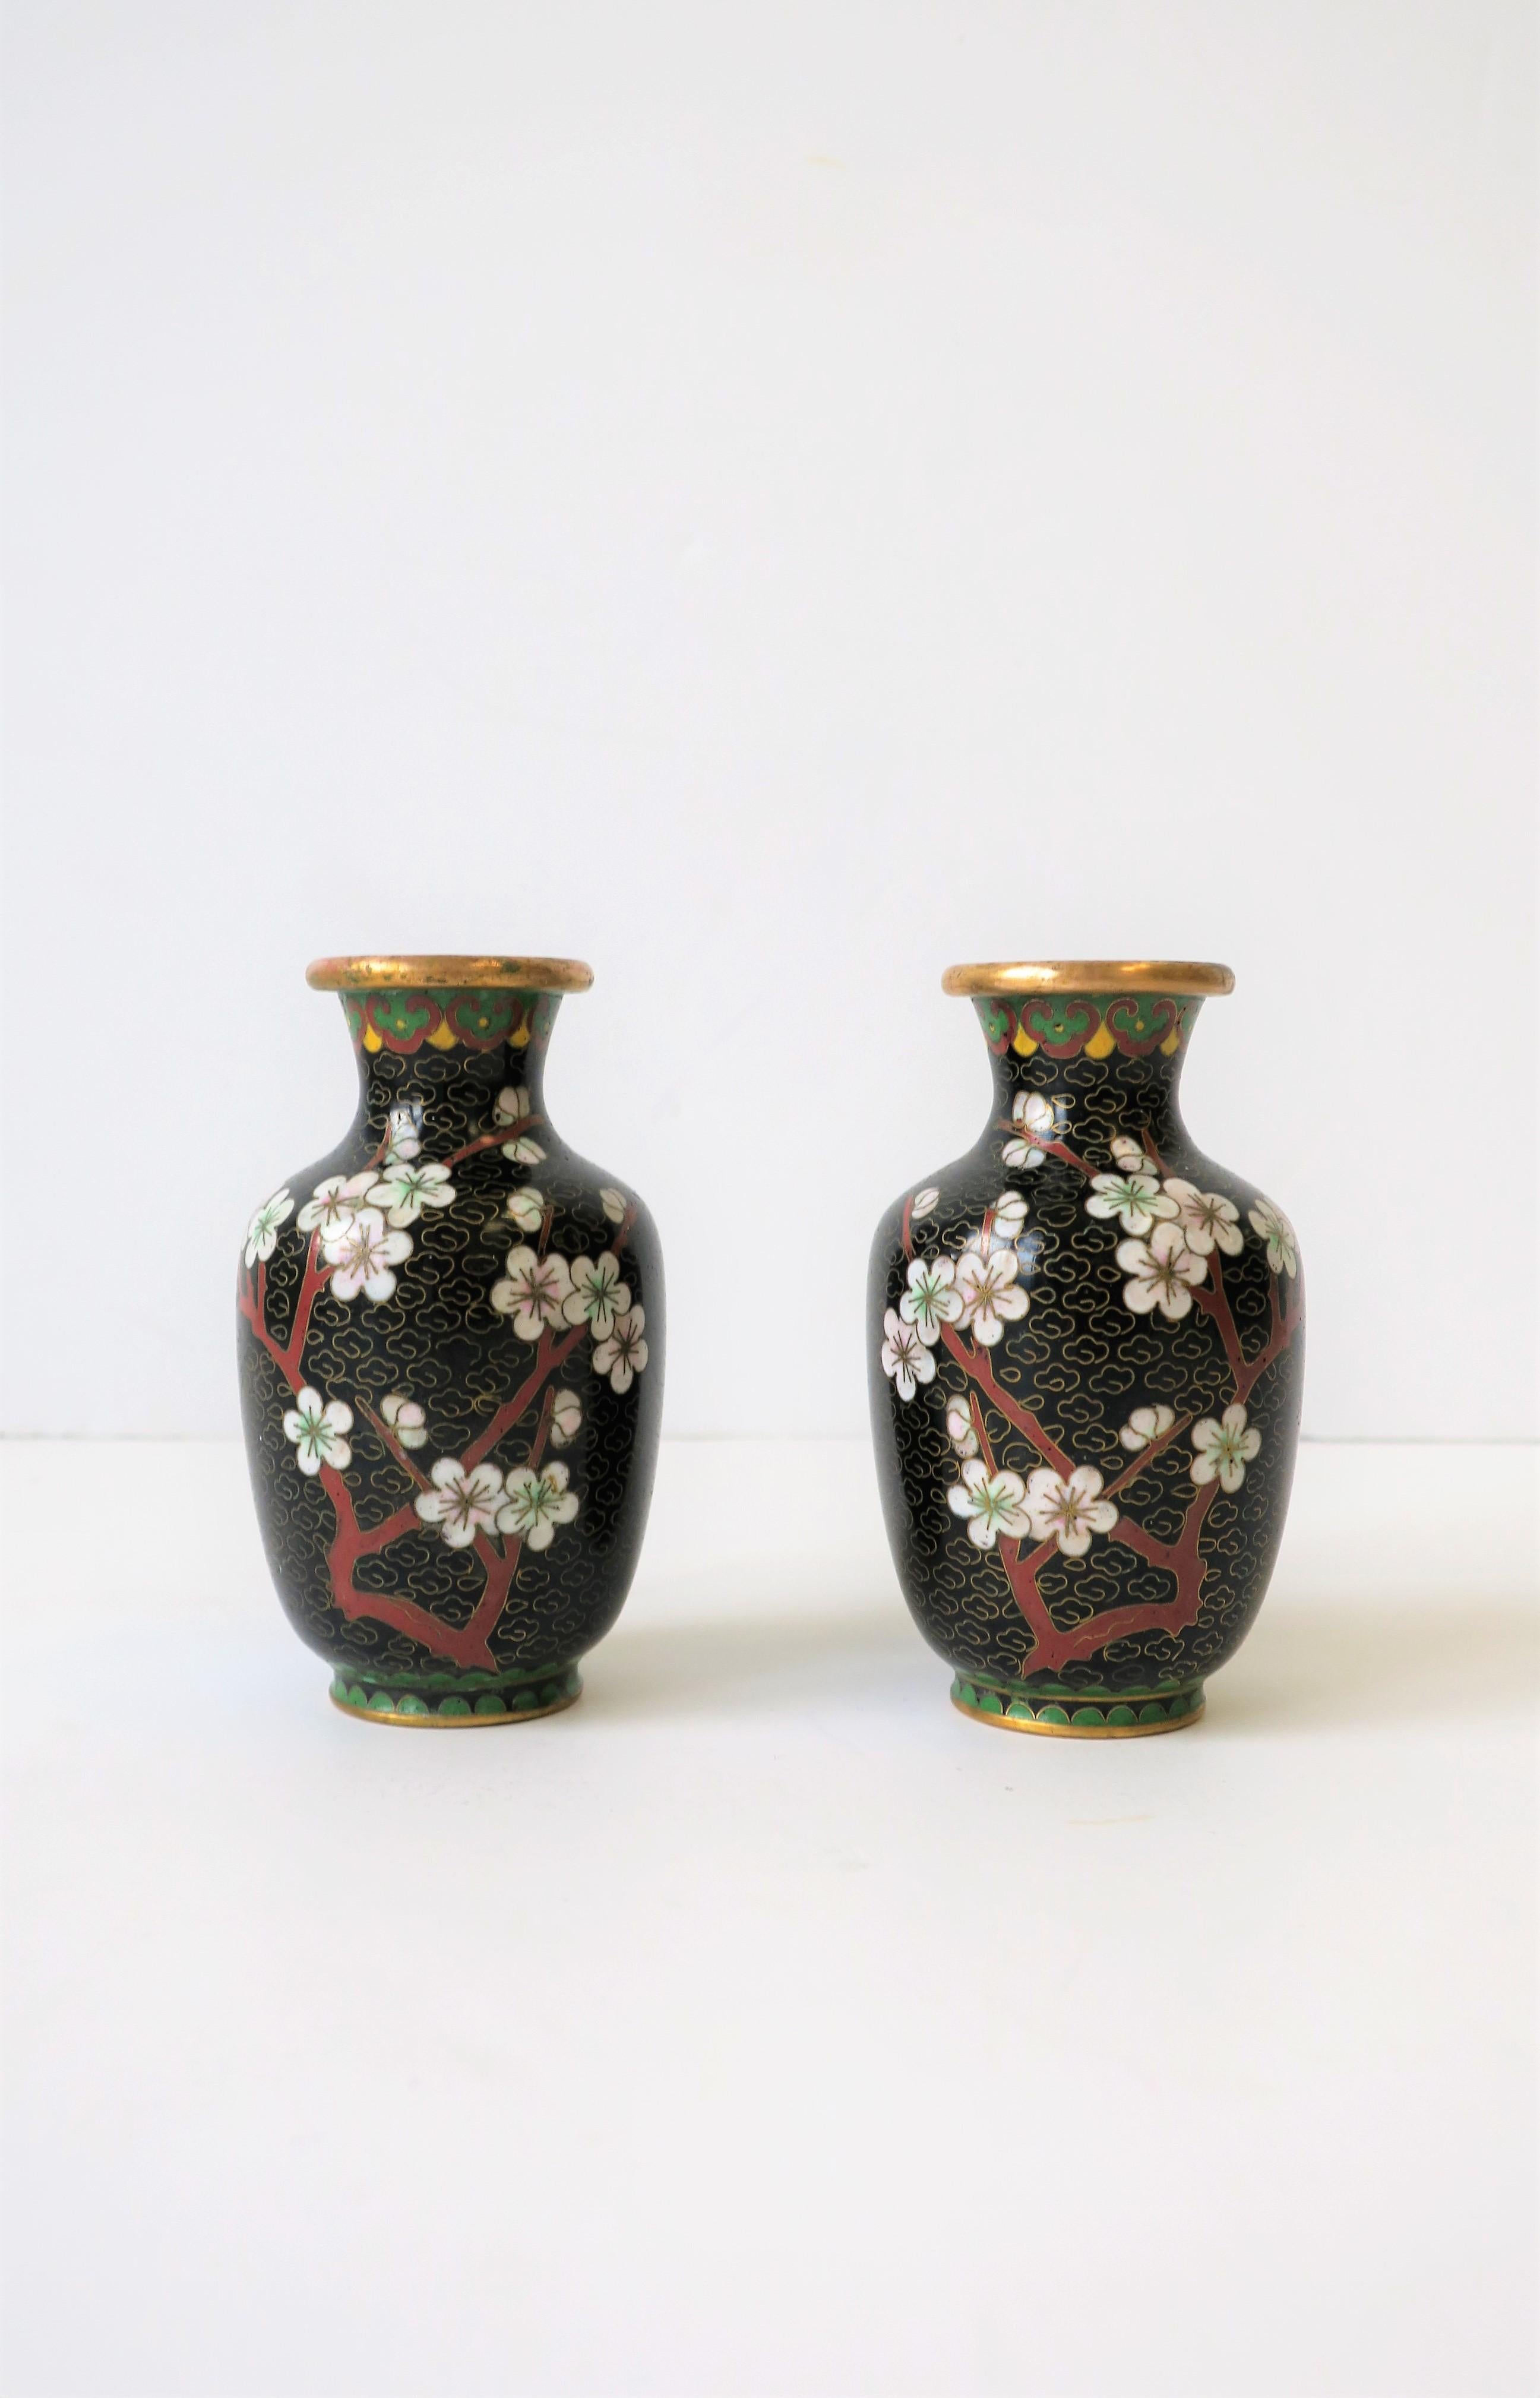 A beautiful pair of vintage gold brass and cloisonné enamel vases in black, red burgundy, and white , with a cherry blossom flower design, circa 1970s, China. Vases are predominantly black, white, and red burgundy, with touches of green and yellow